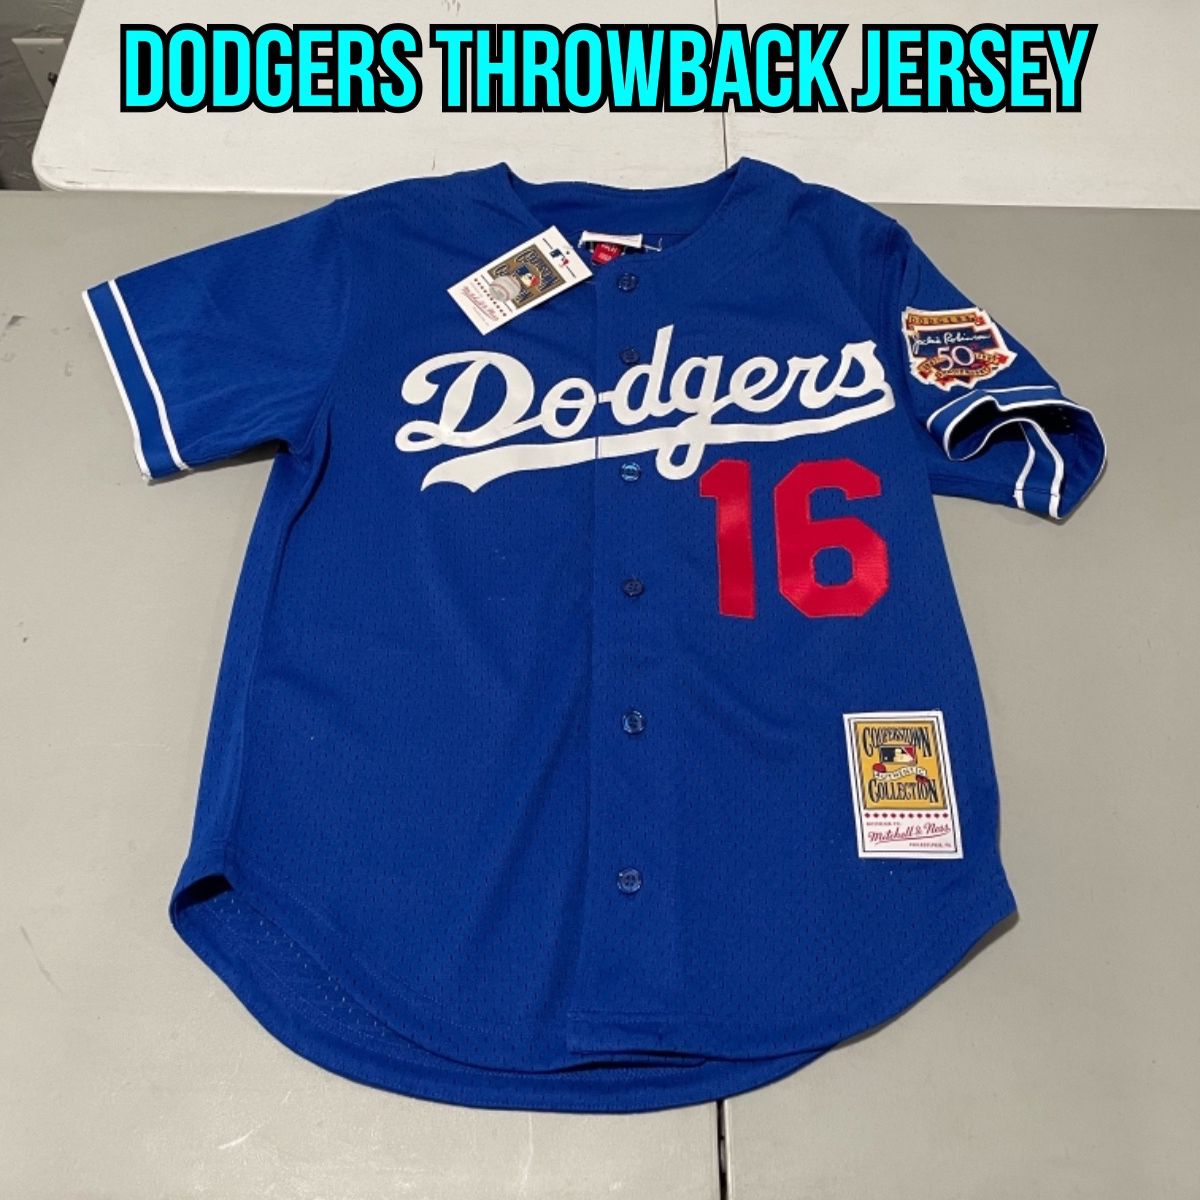 piazza mitchell and ness dodgers